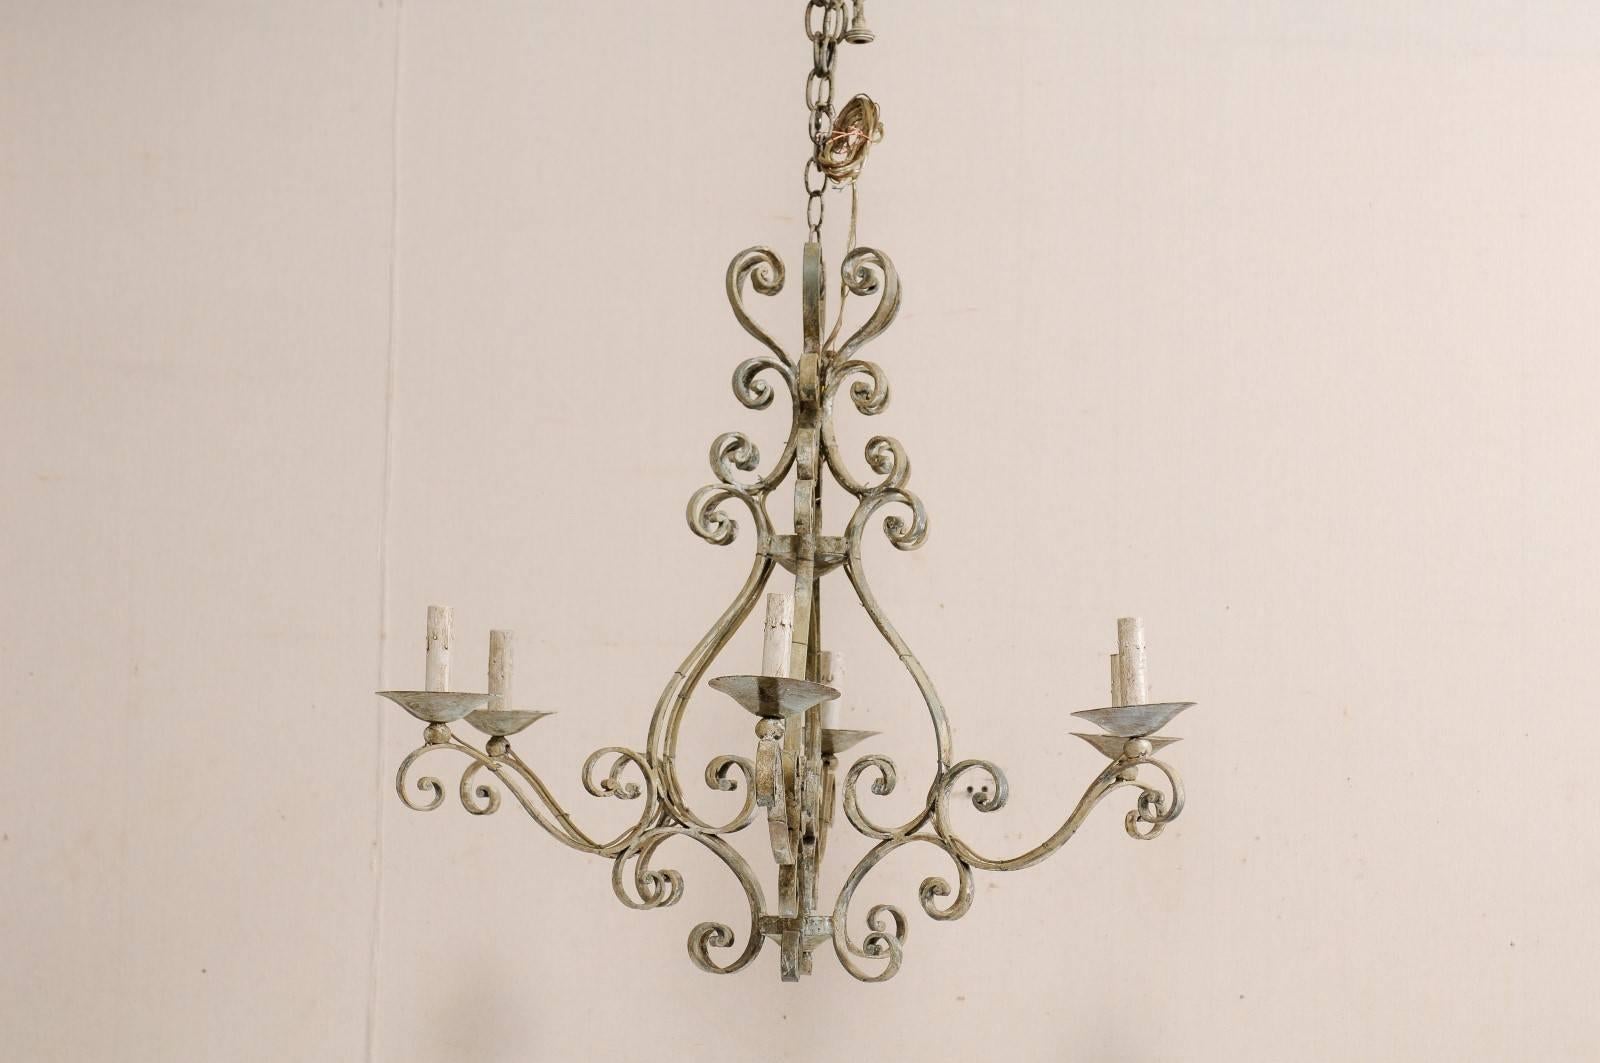 Patinated French Mid-20th Century Iron Chandelier Painted with Neutral Beige & Tan Colors